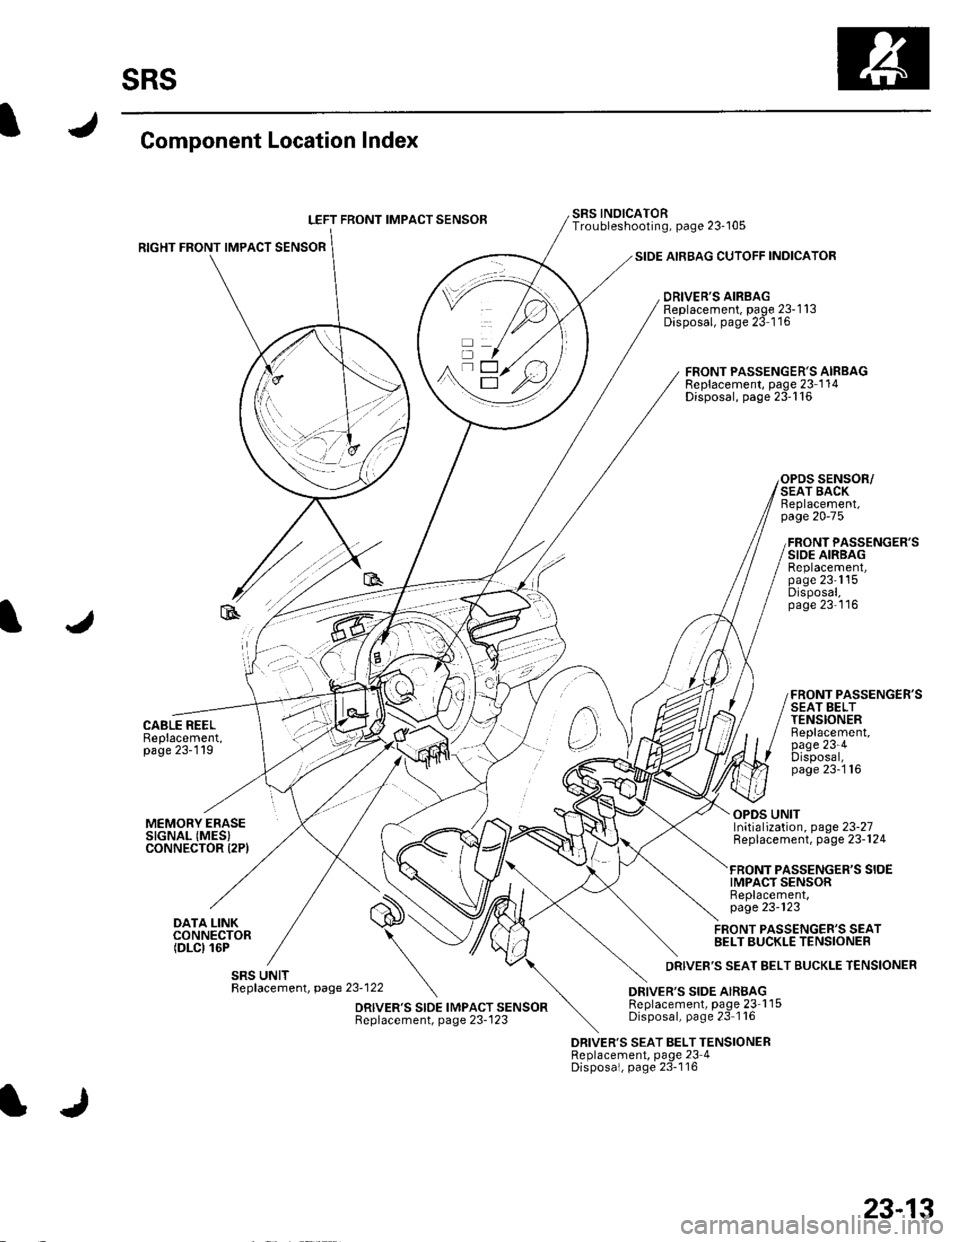 HONDA CIVIC 2003 7.G Workshop Manual sRs
Component Location Index
LEFT FRONT IMPACT SENSOB
RIGHT FRONT IMPACT SENSOR
CABLE REELBeplacement,page 23-119
SIDE AIRBAG CUTOFF INDICATOR
DRIVERS AIRBAGReplacement, page 23-1 13Disposal, page 23